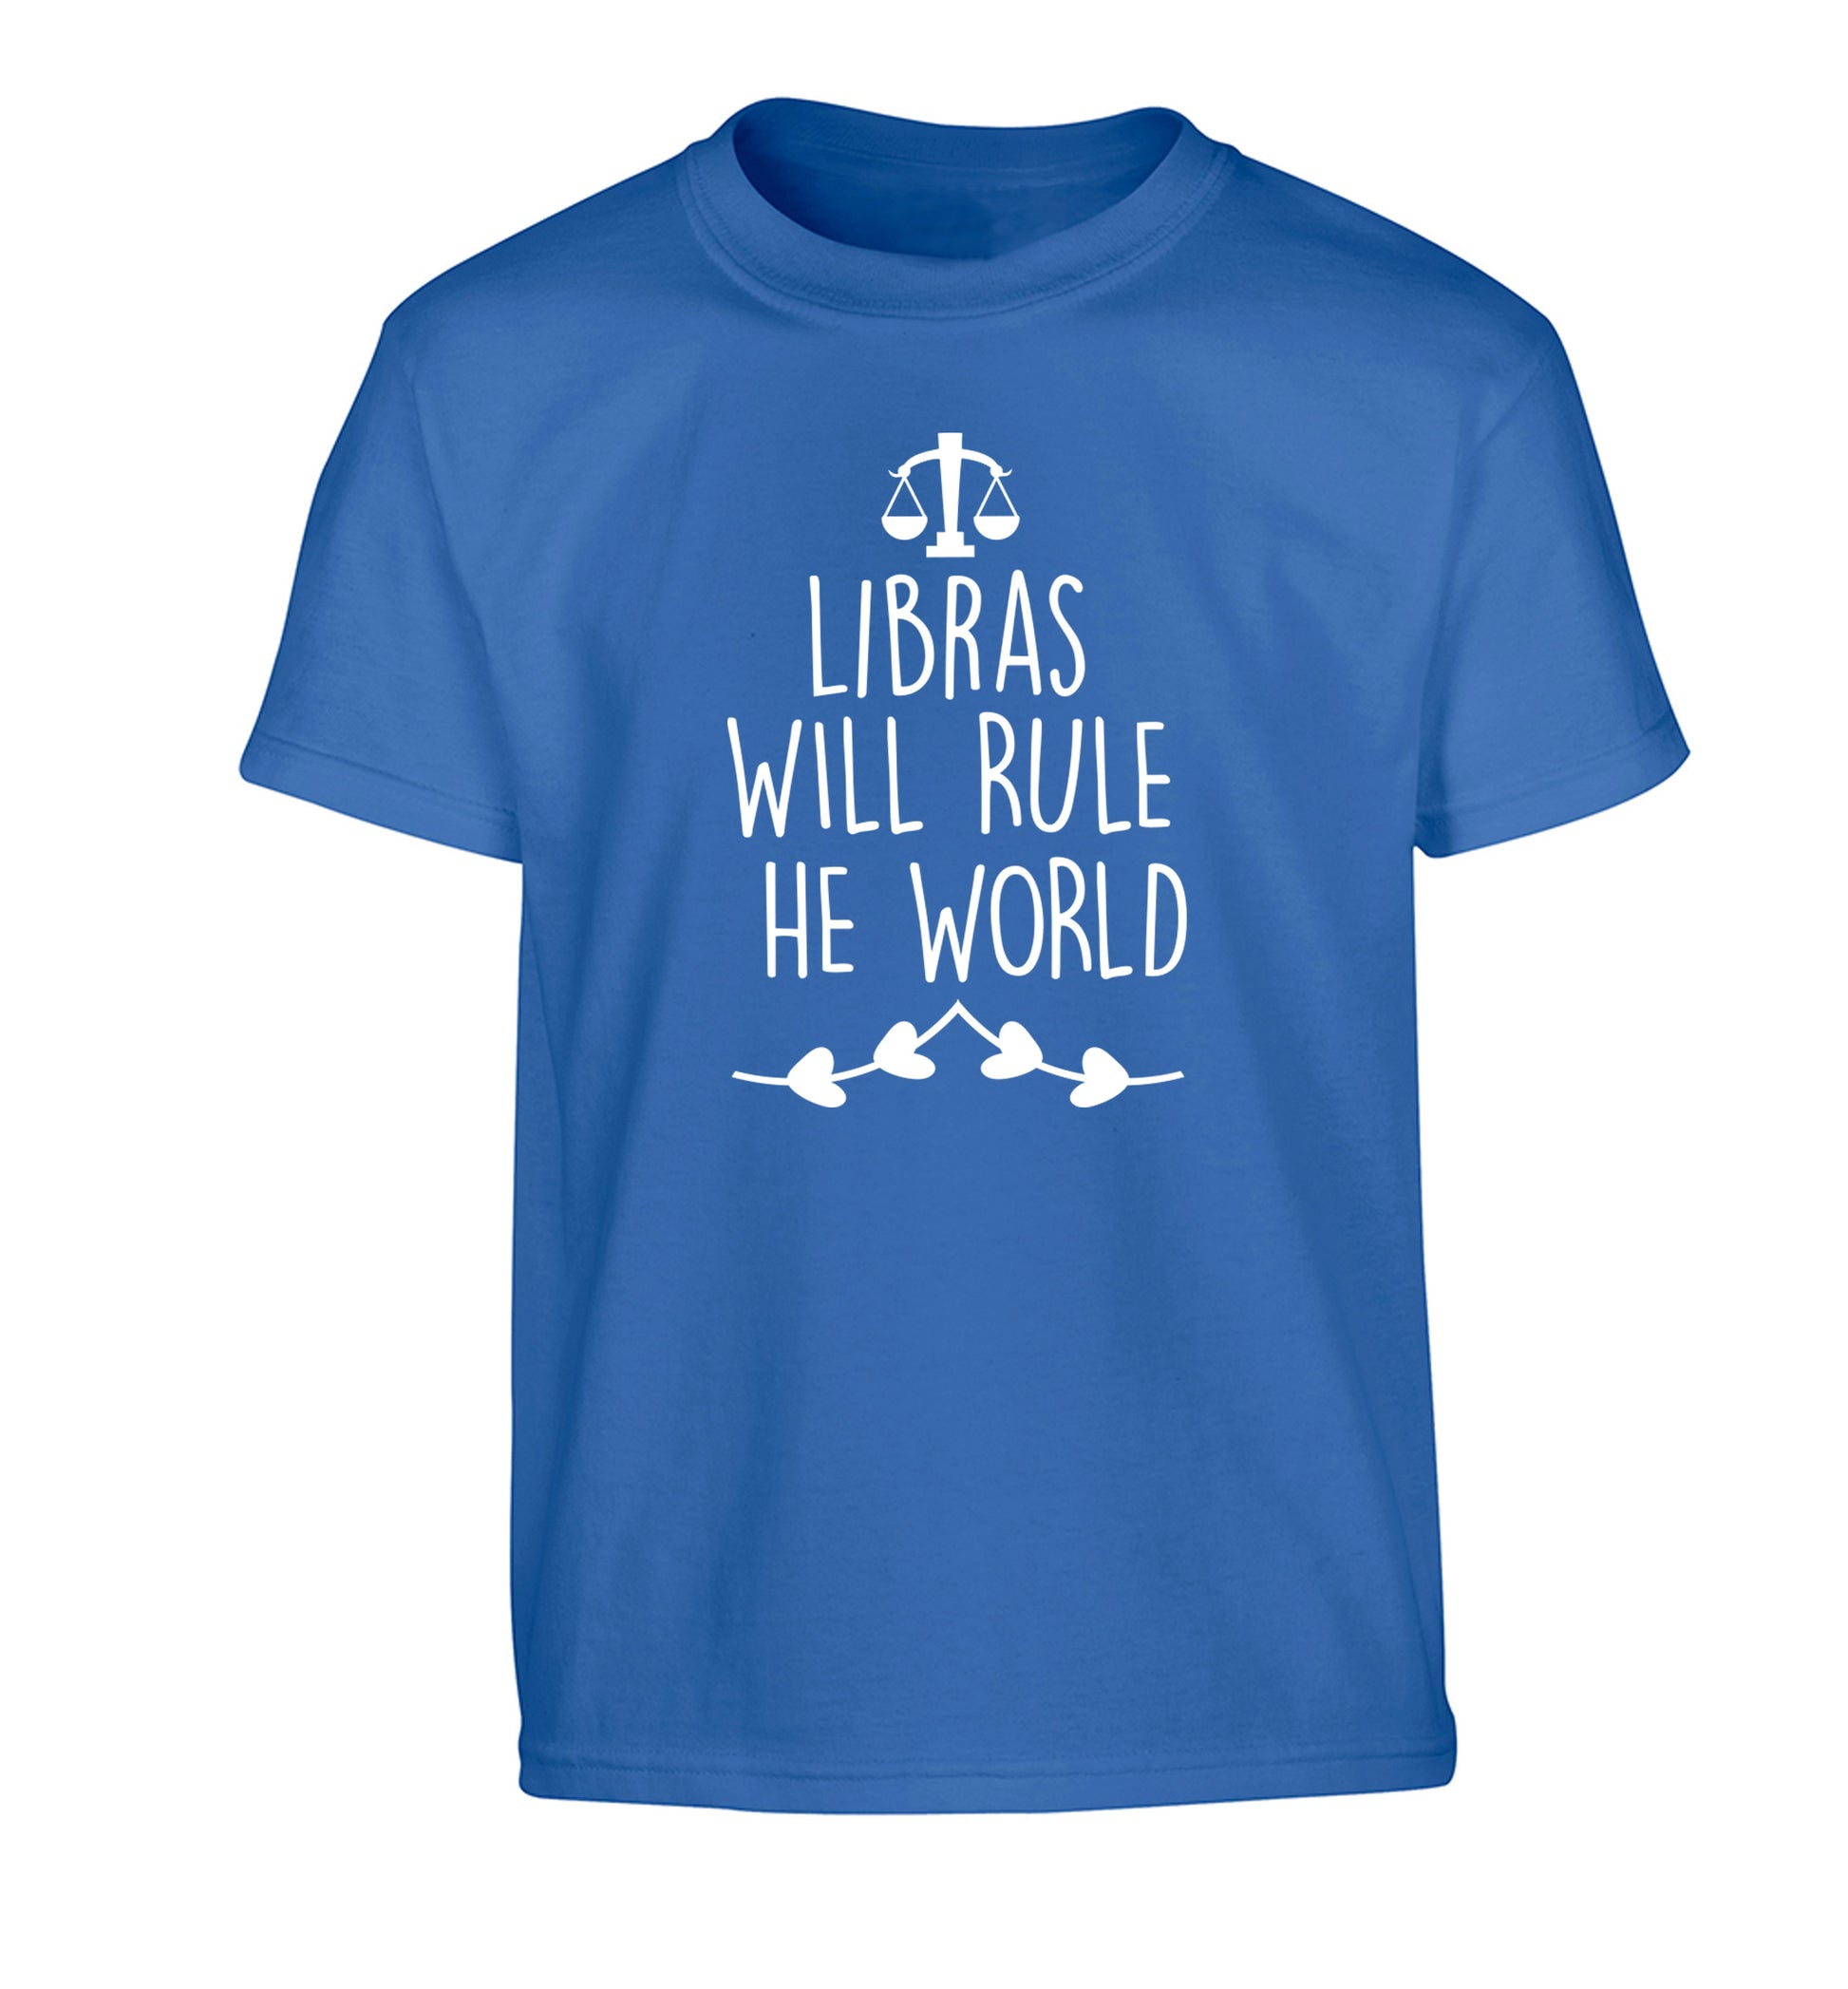 Libras will rule the world Children's blue Tshirt 12-13 Years